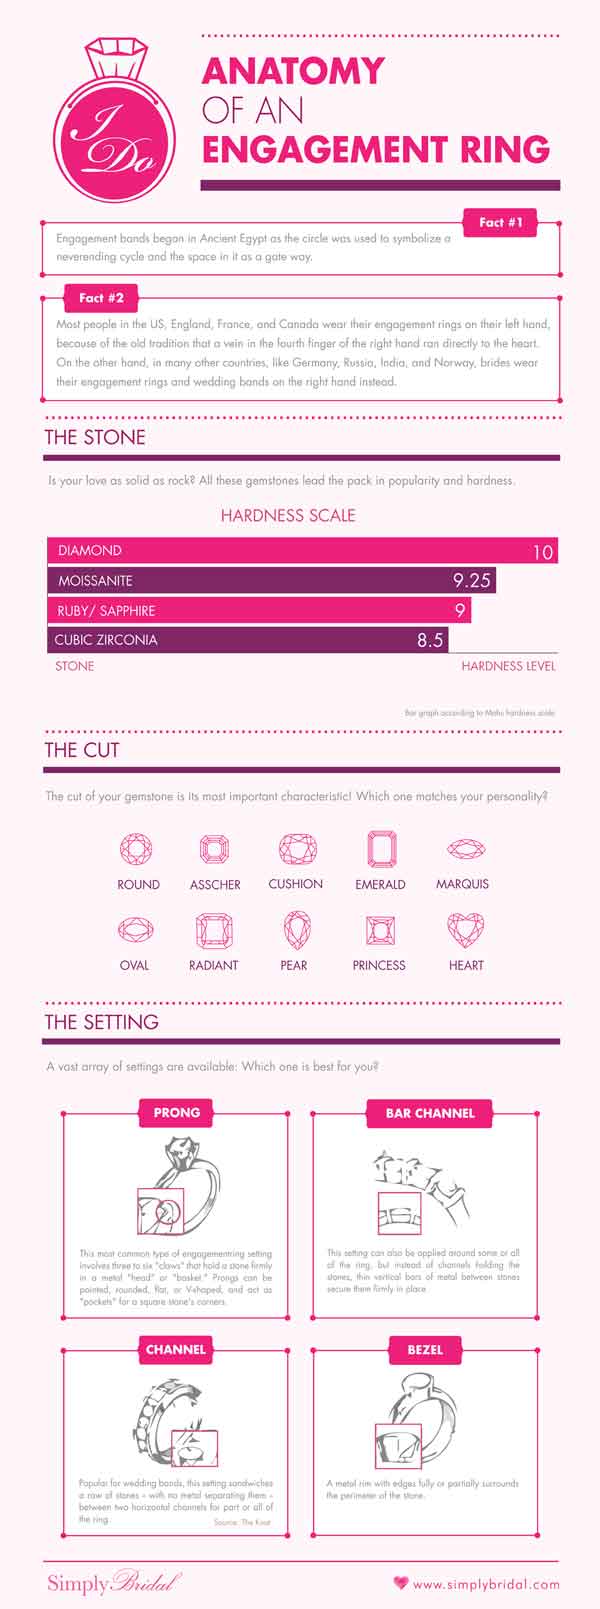 An Anatomy of Engagement Ring for Weddings Infographic.